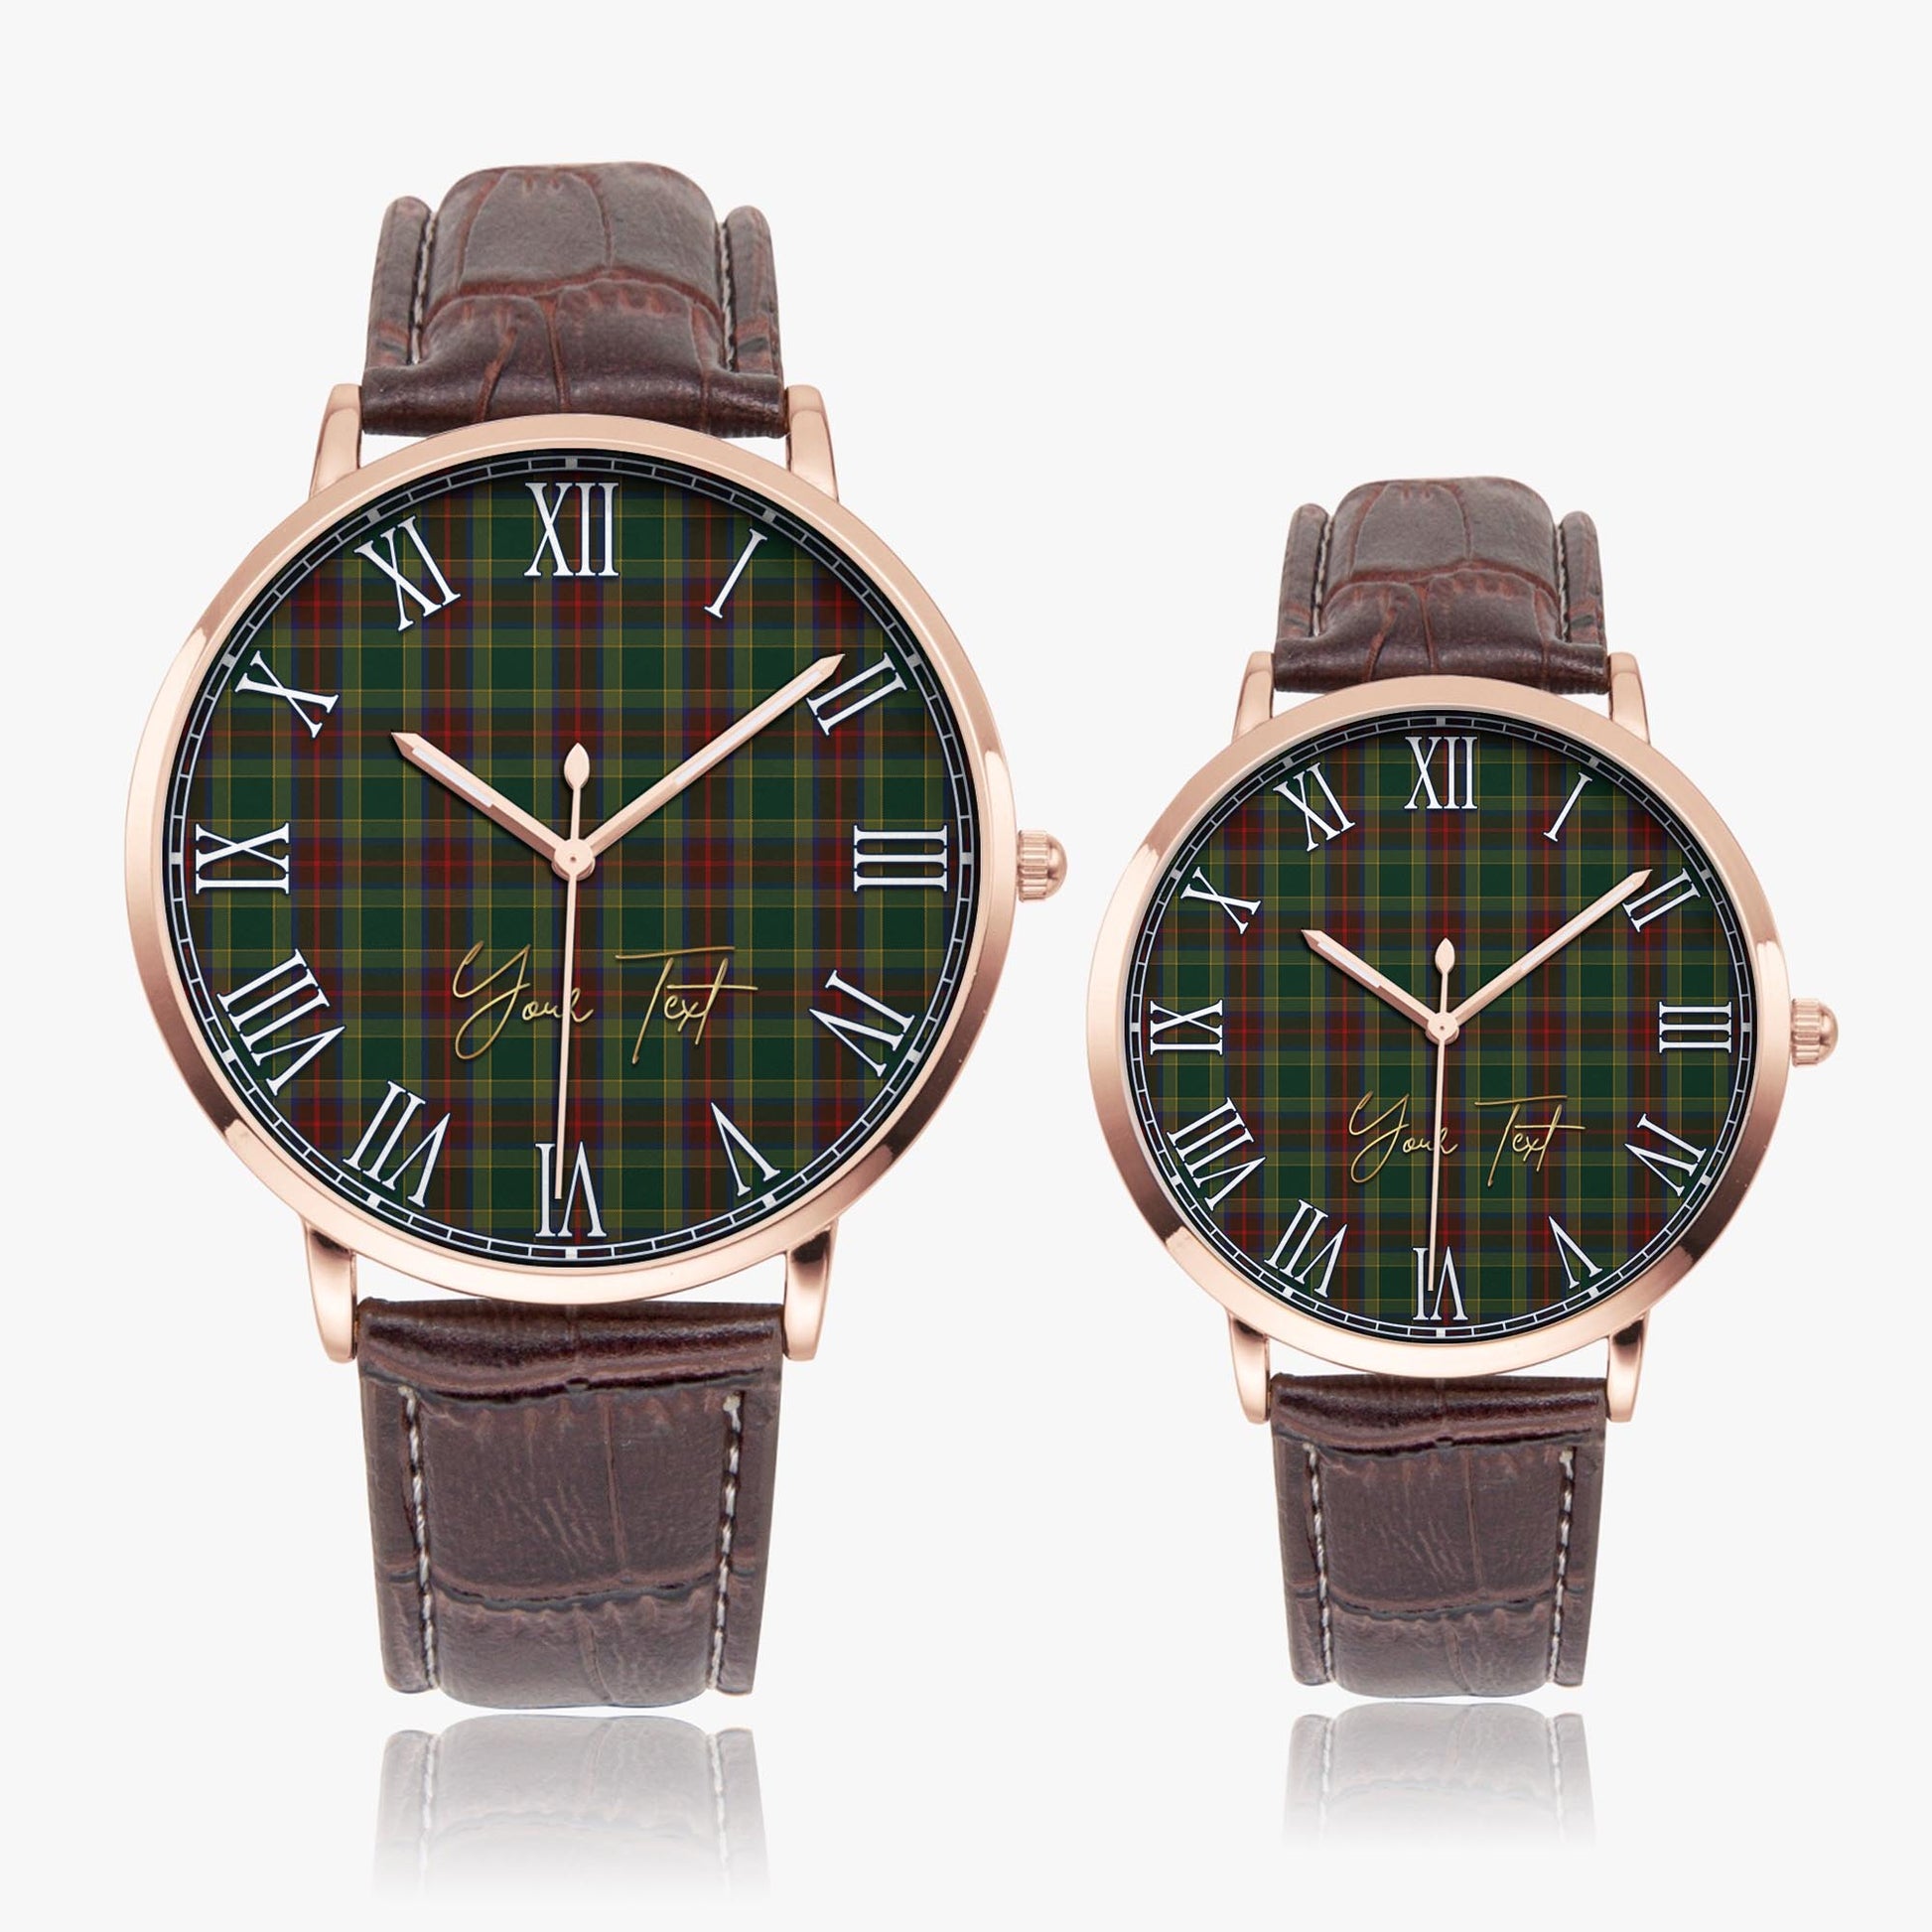 Waterford County Ireland Tartan Personalized Your Text Leather Trap Quartz Watch Ultra Thin Rose Gold Case With Brown Leather Strap - Tartanvibesclothing Shop